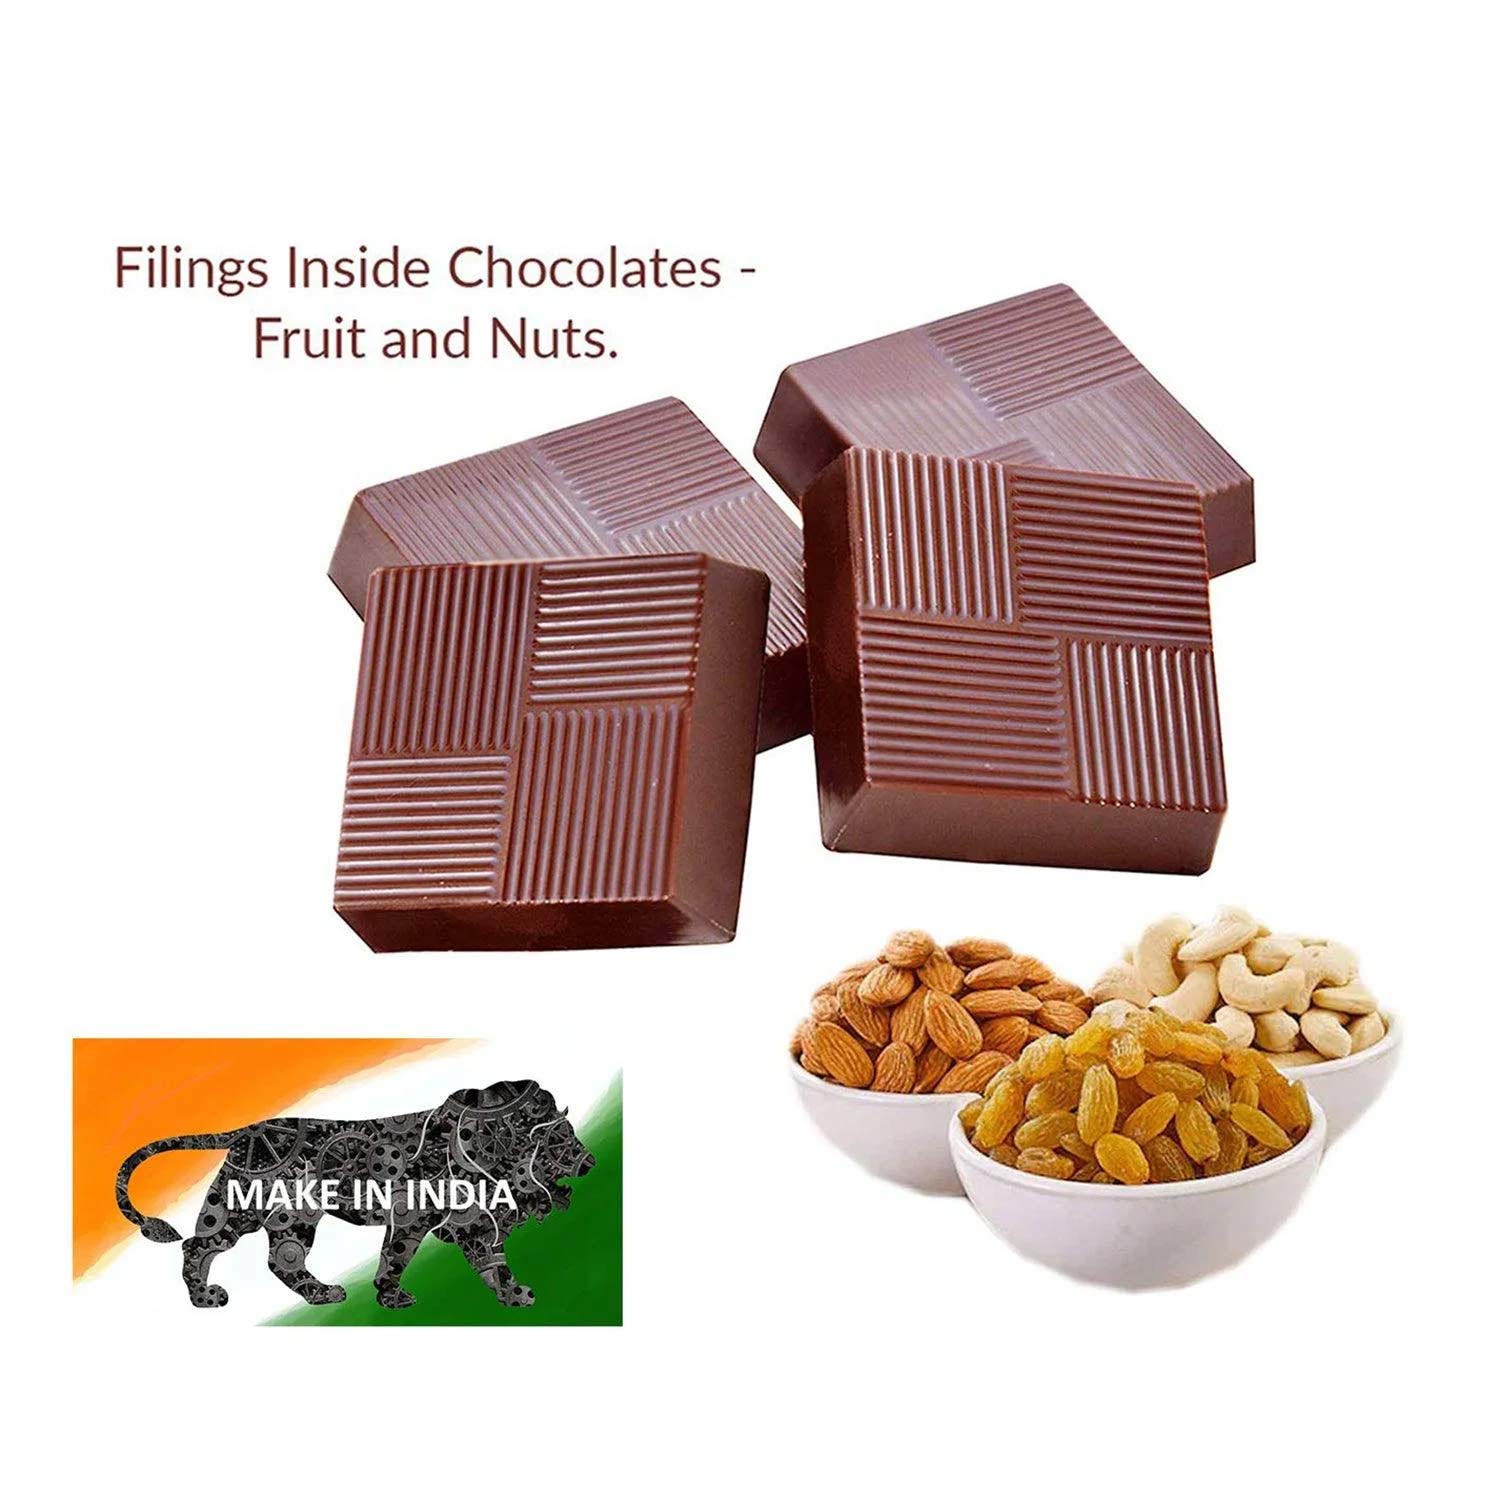 Awkward but attractive design printed customised chocolates gift